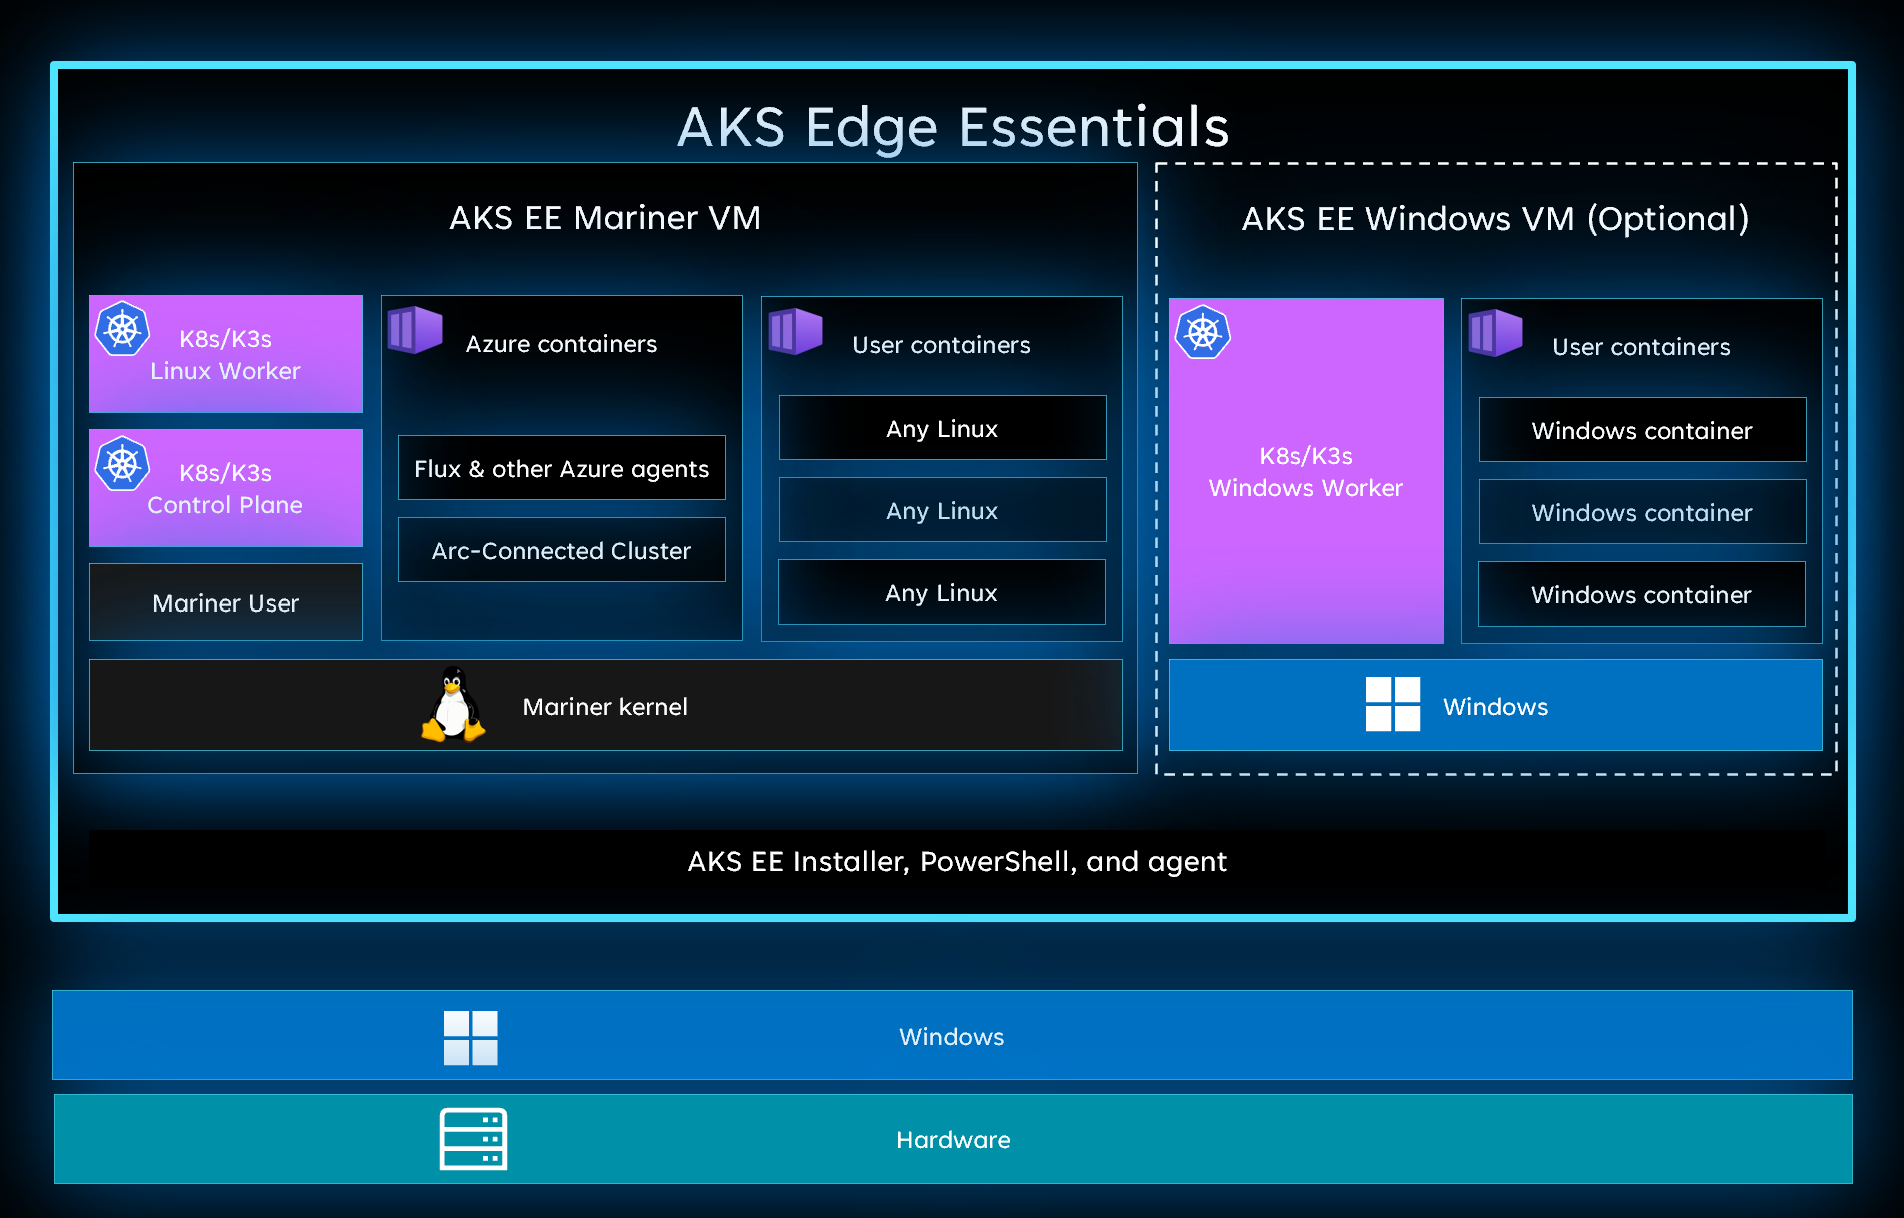 Screenshot showing the the VMs in AKS Edge.